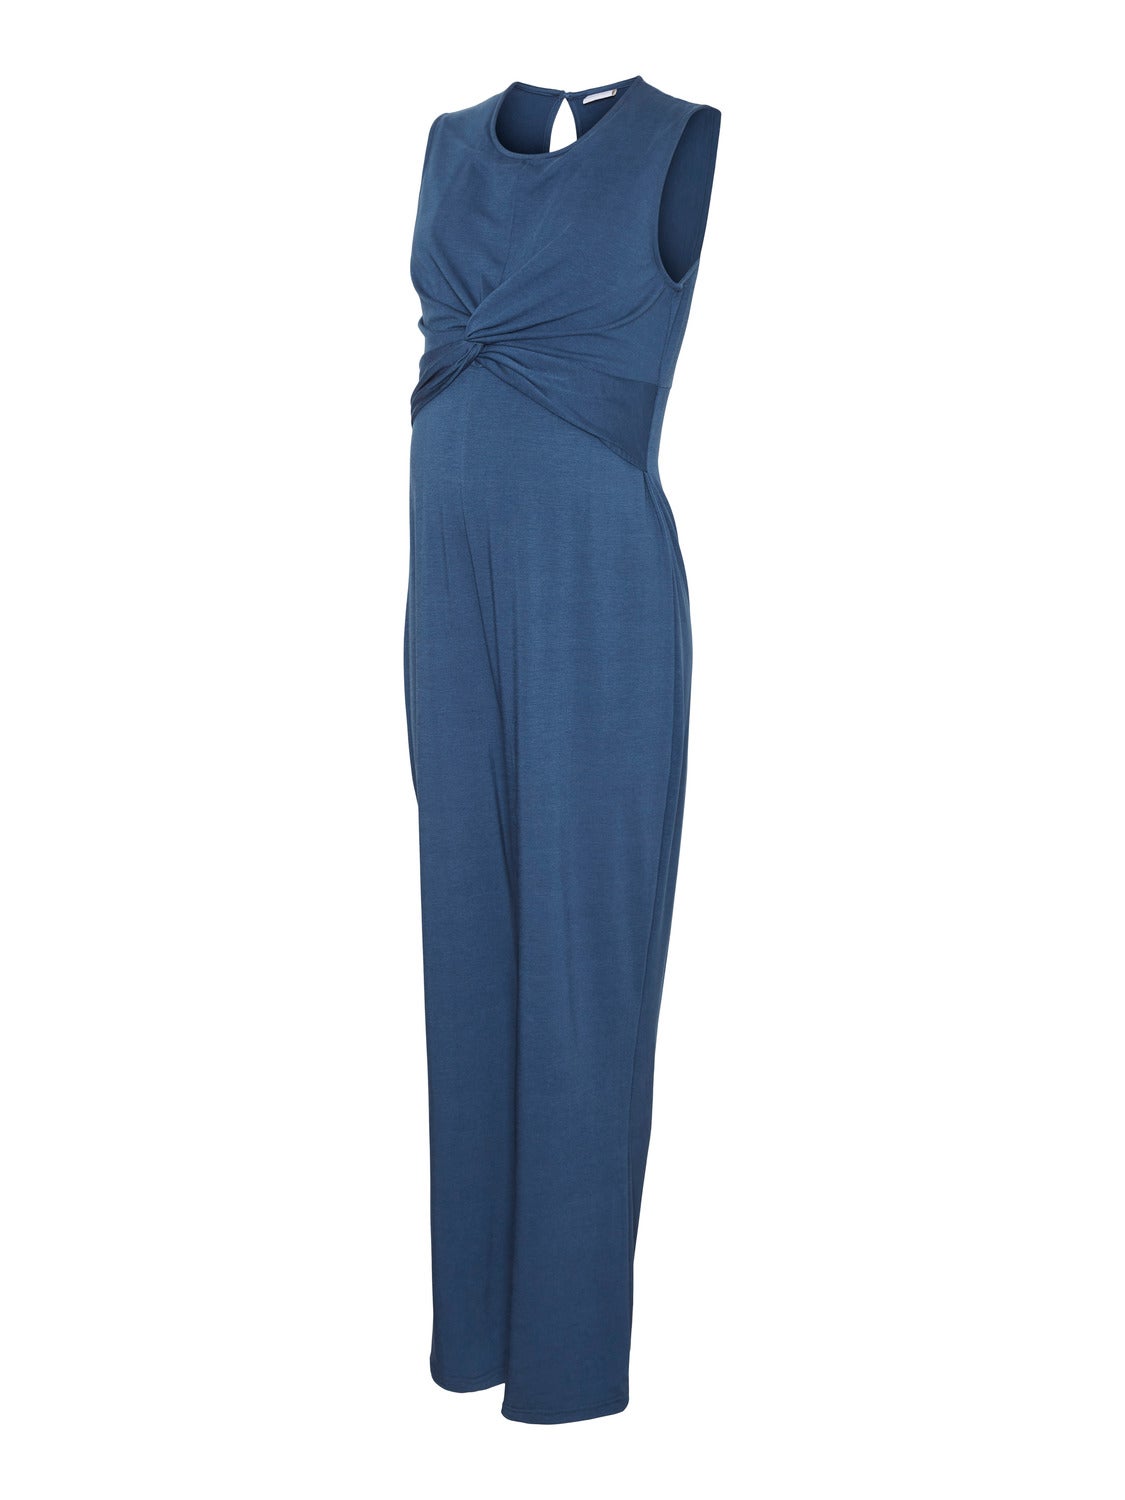 Jumpsuits & Rompers Maternity & Nursing Clothes | Nordstrom